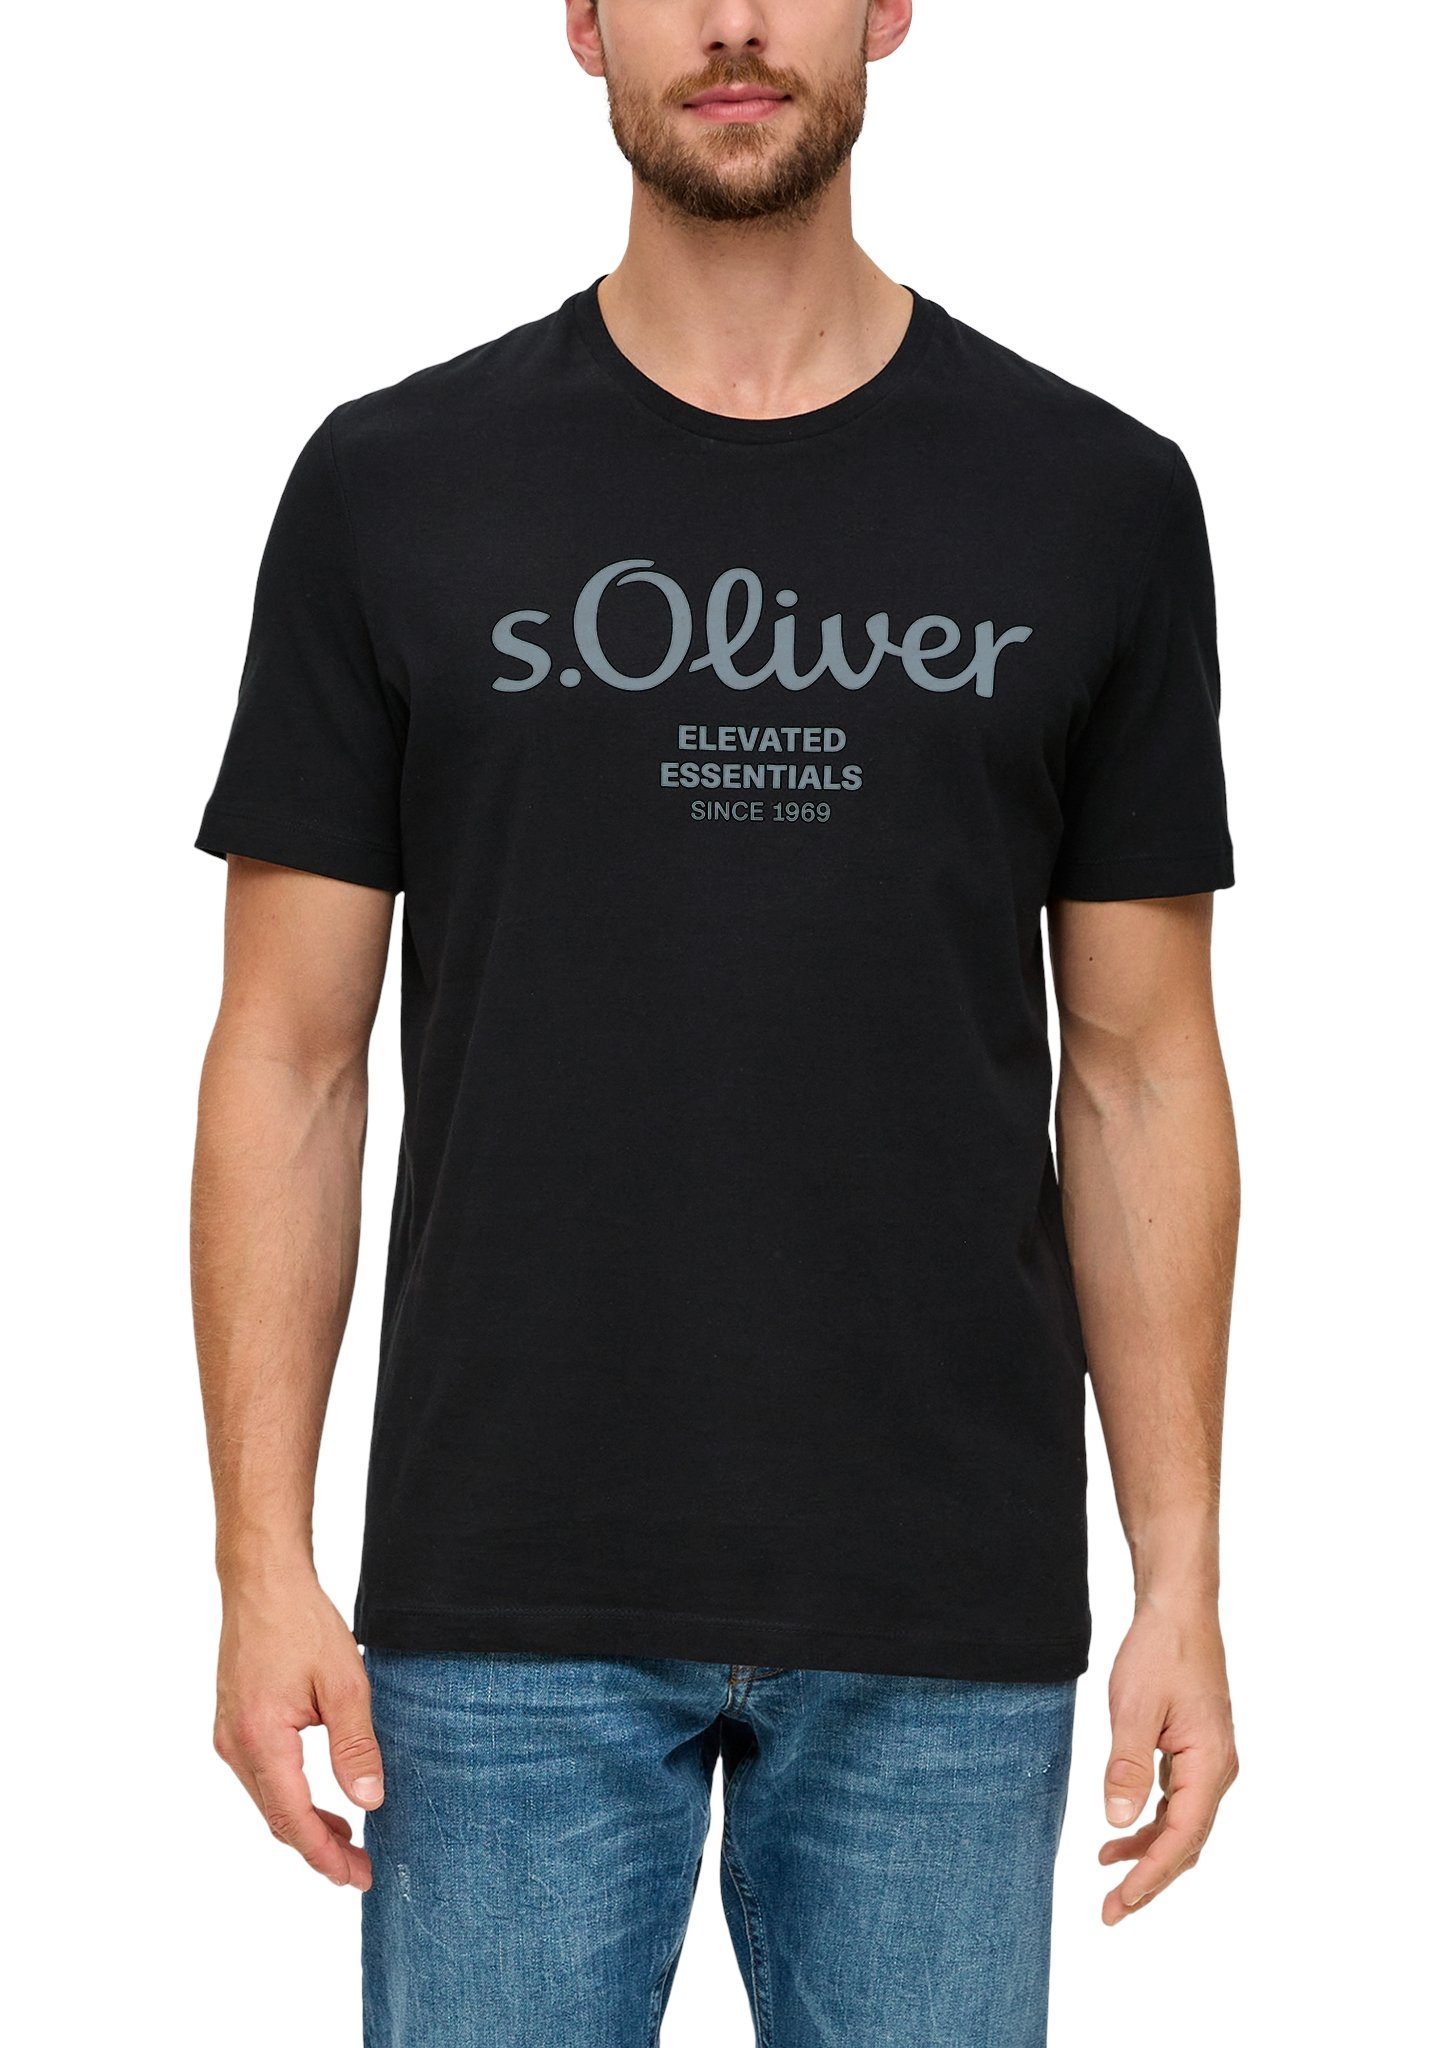 s.Oliver T-Shirt im sportiven Look black